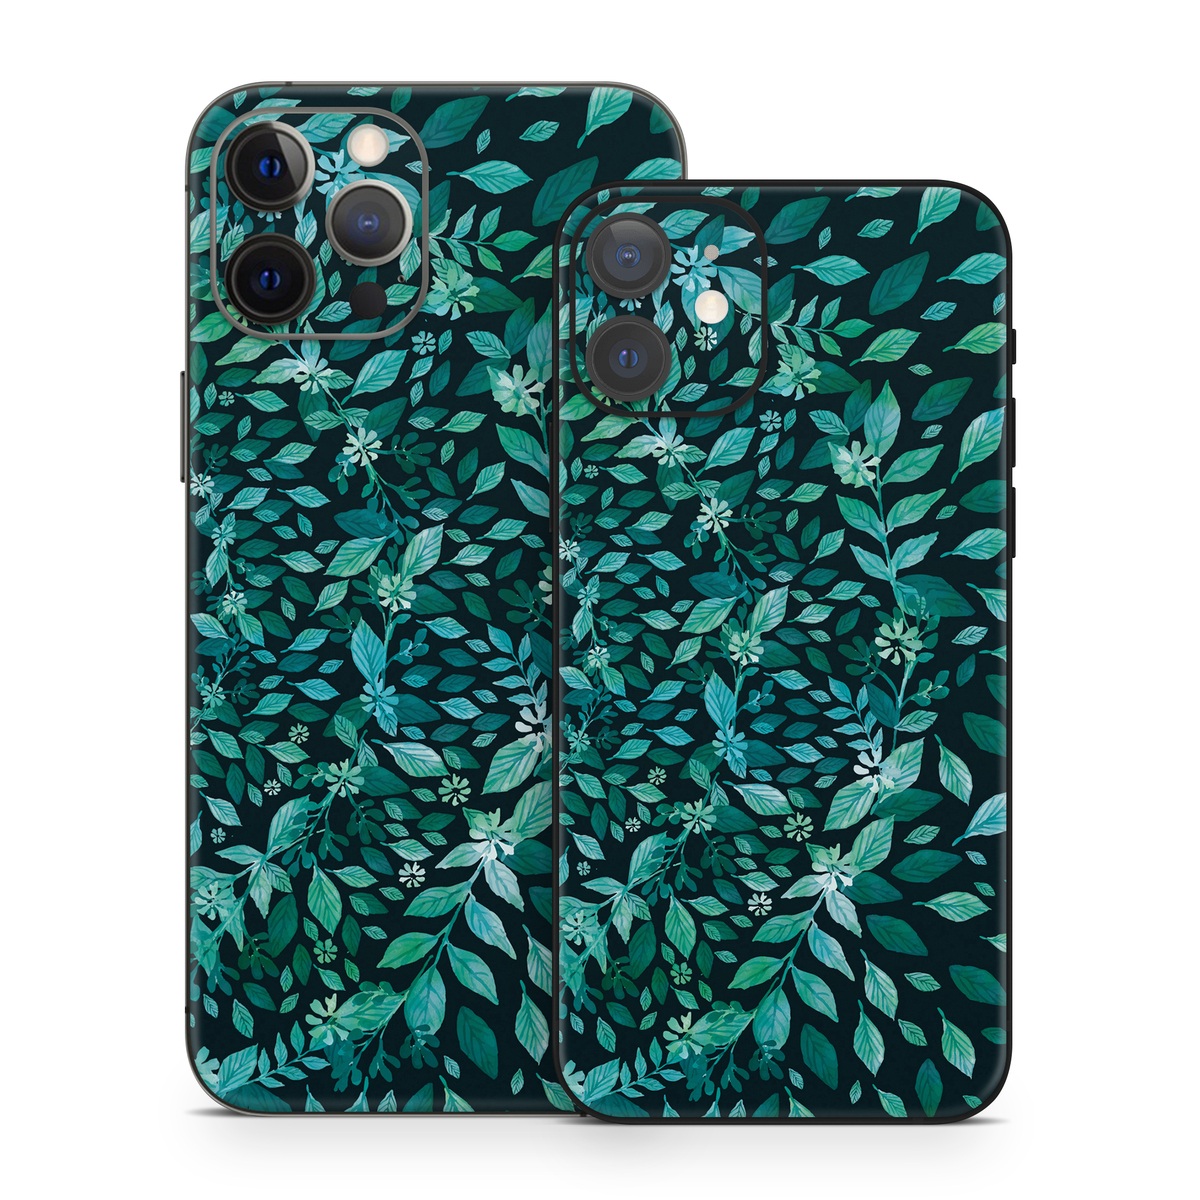 iPhone 12 Series Skin design of Green, Aqua, Organism, Turquoise, Natural environment, Teal, Marine biology, Water, Leaf, Plant, with black, green, white colors